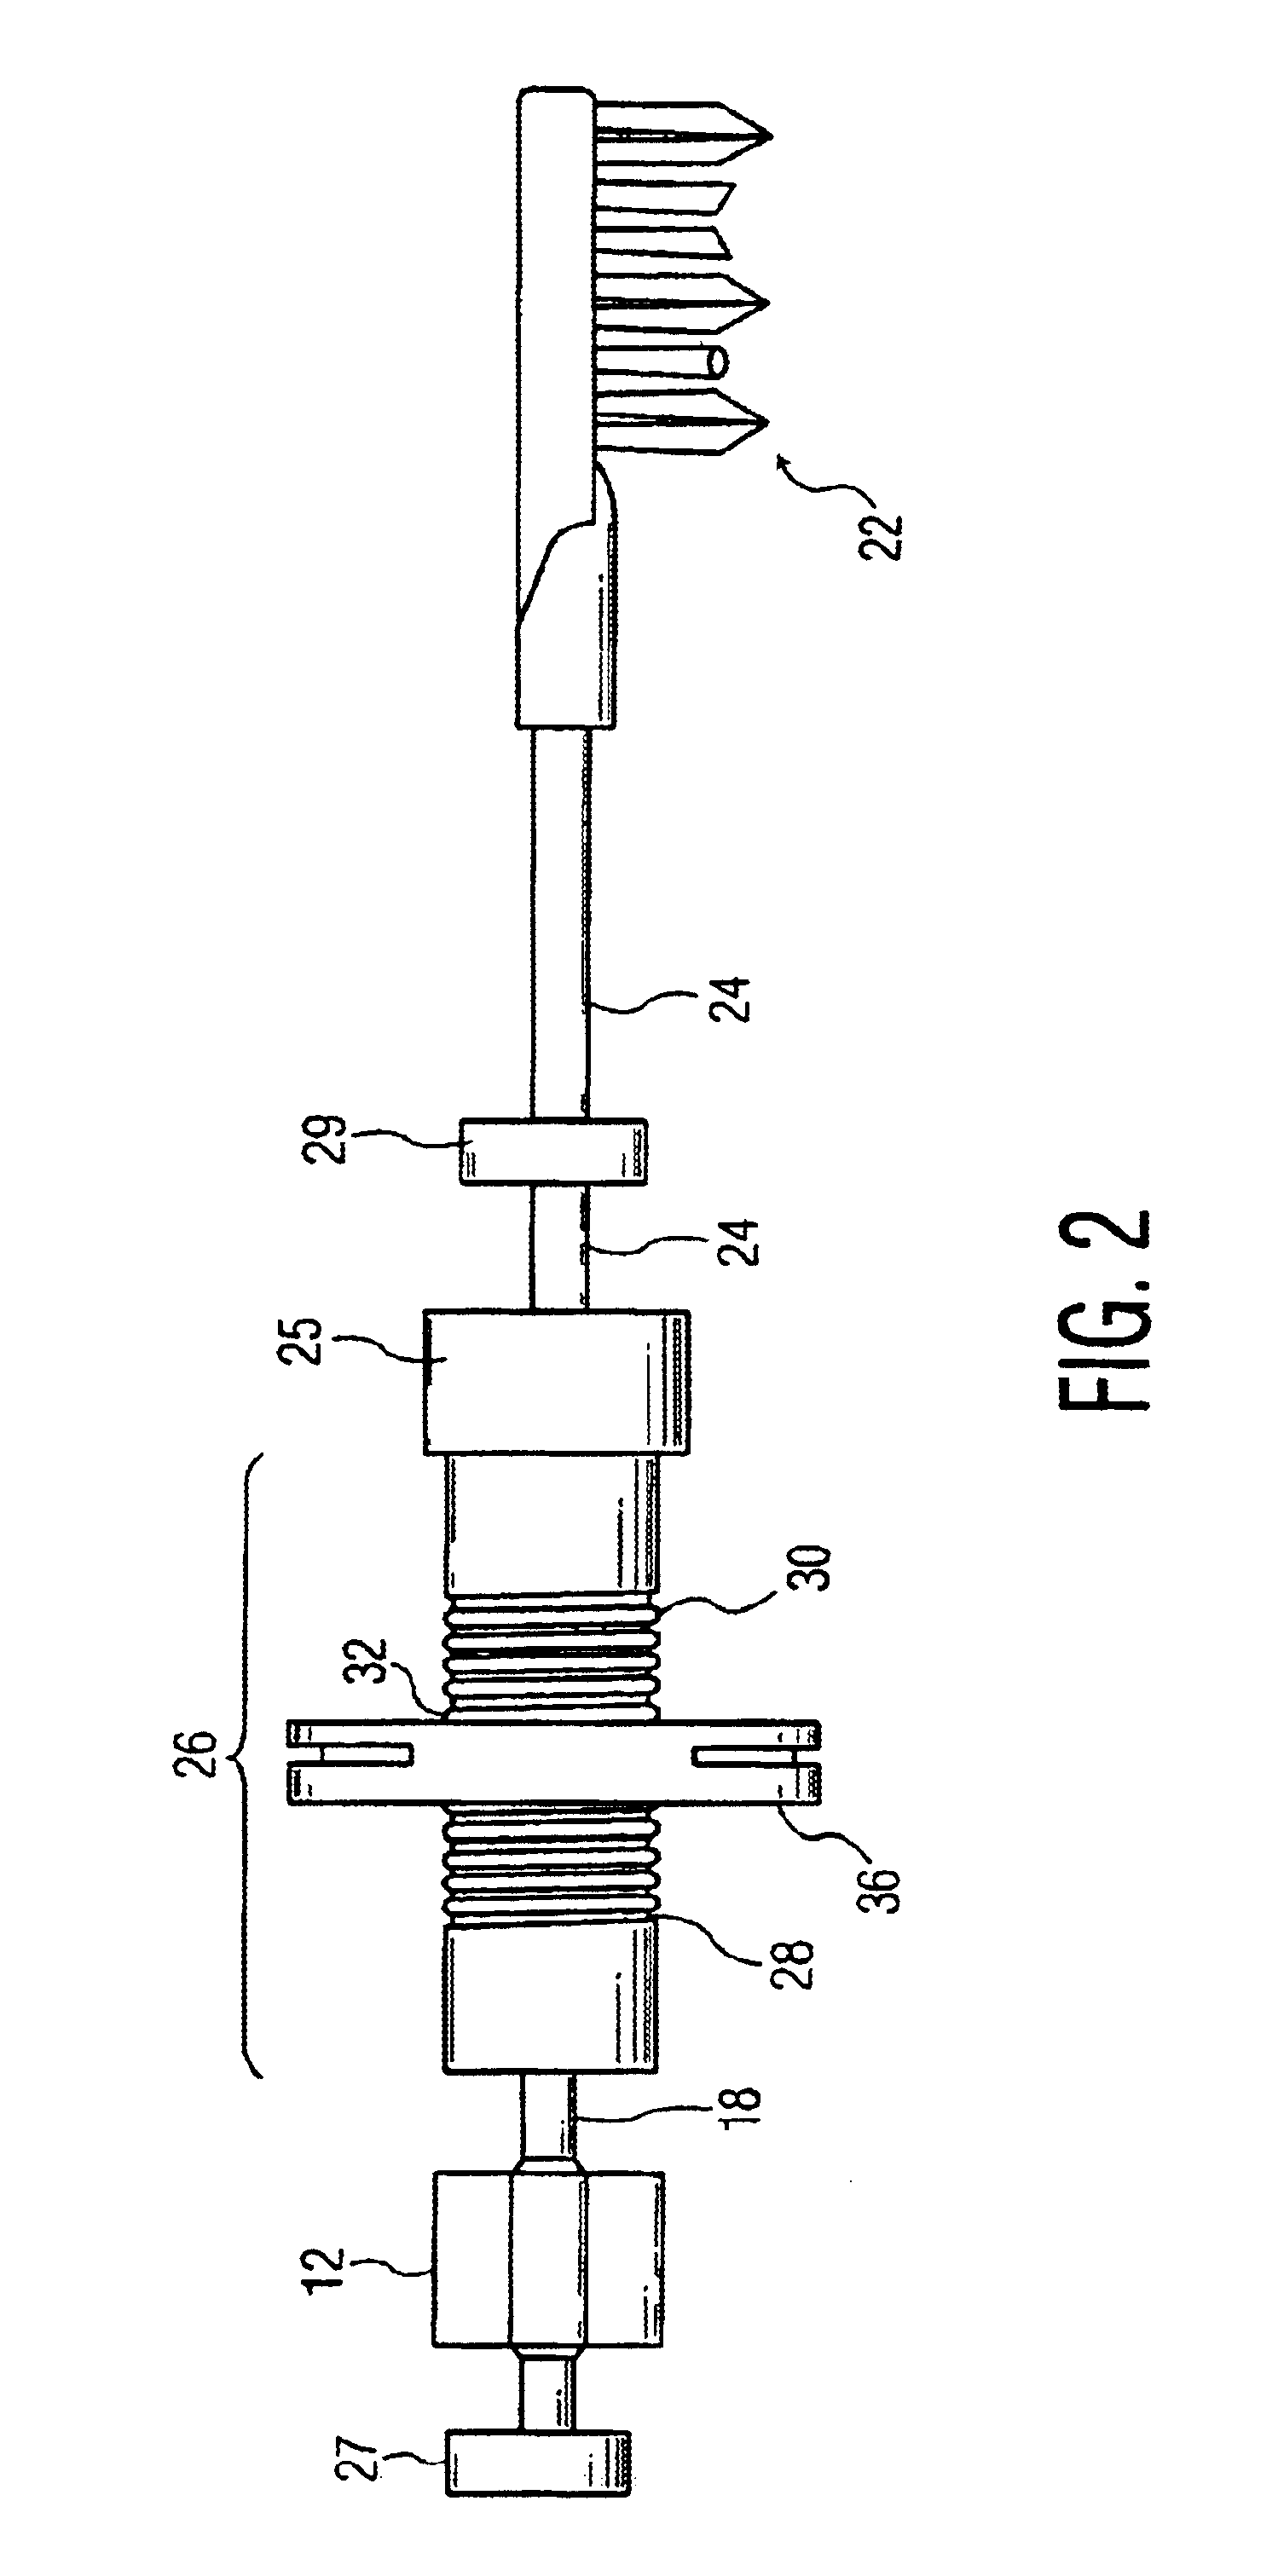 Nodal mounted system for driving a power appliance